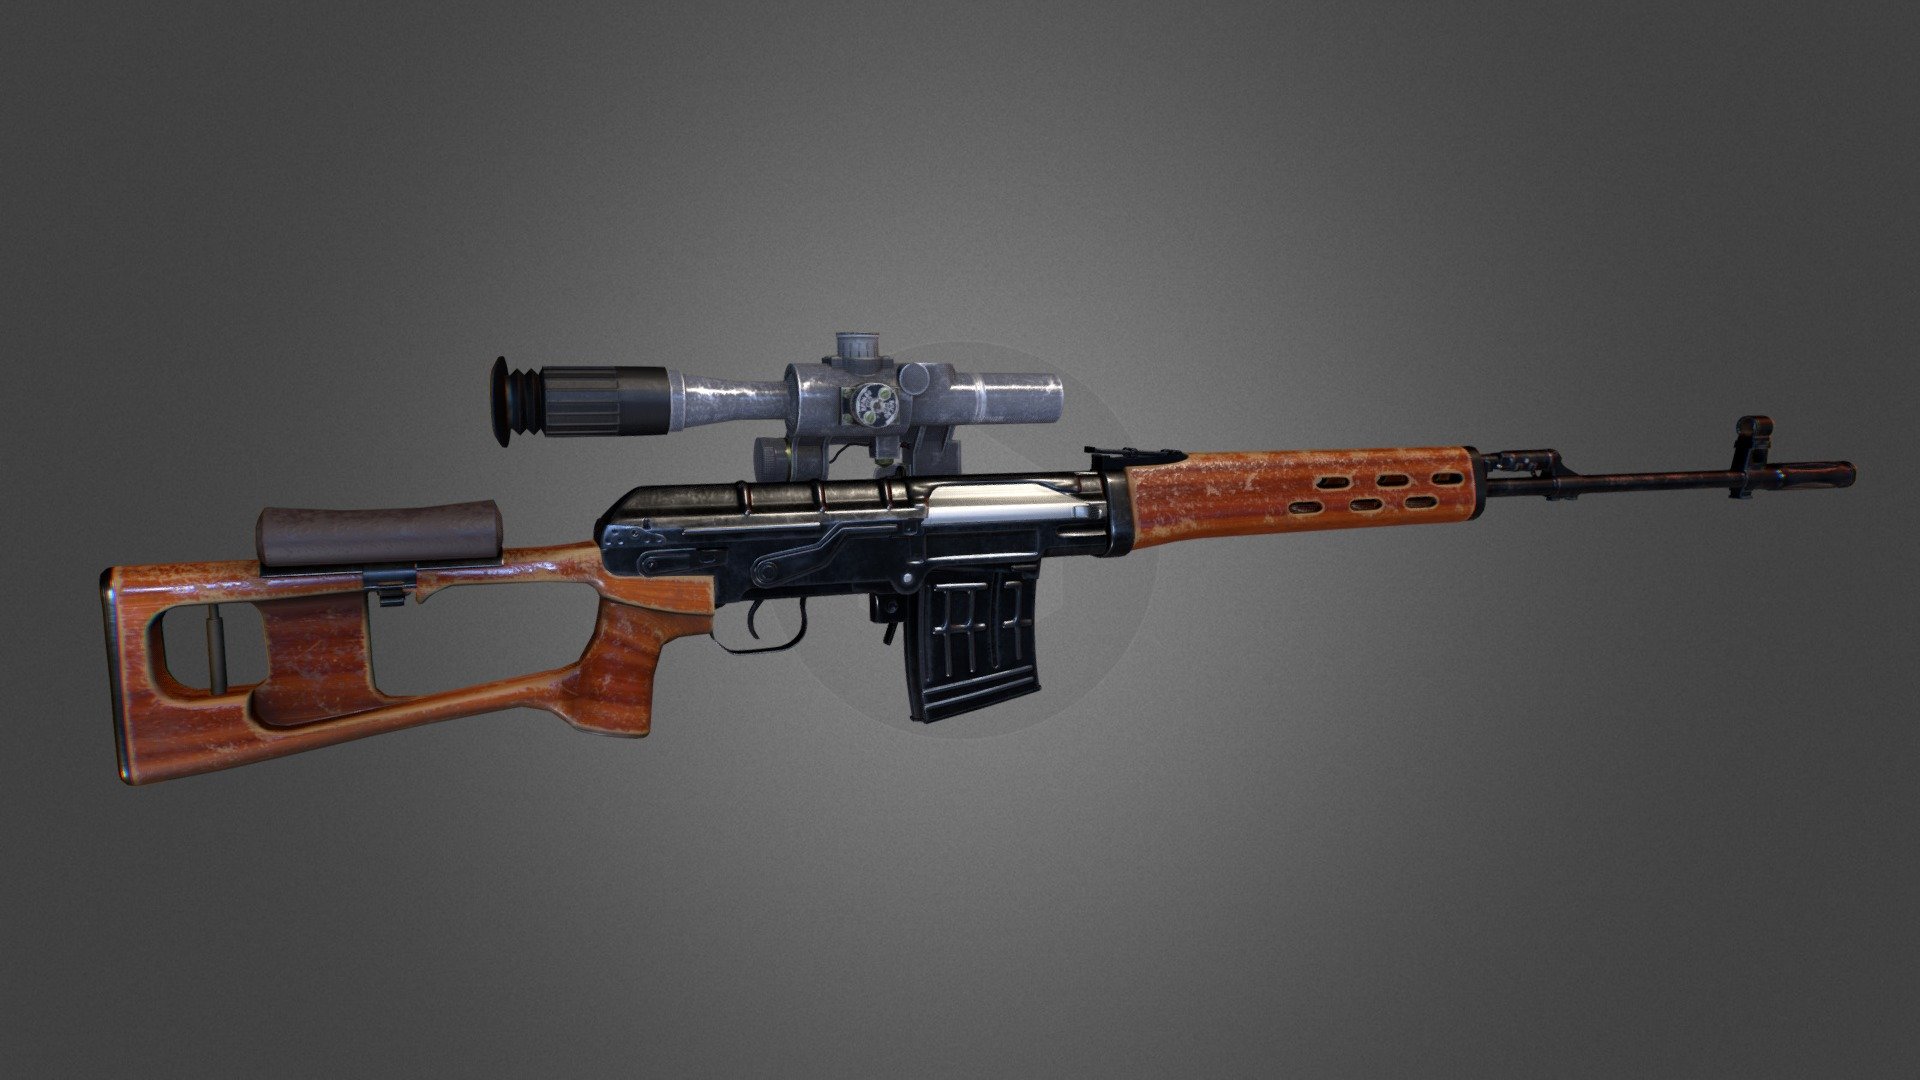 Dragunov Sniper Rifle - SVD low-poly 3d model ready for Virtual Reality (VR), Augmented Reality (AR), games and other real-time apps.

The Dragunov sniper rifle (formal Russian: 1963 Snayperskaya Vintovka sistem'y Dragunova obraz'tsa 1963 goda (SVD-63), officially &lsquo;Sniper Rifle, System of Dragunov, Model of the Year 1963') is a semi-automatic sniper/designated marksman rifle chambered in 7.6254mmR and developed in the Soviet Union.





Game ready model. All objects subdivided for animations, correct pivots.




Full PBR Metalness textures:




Rifle 4096x4096 : 



Albedo 

Normal 

Roughness 

Metallic 


AO




Scope 2048x2048:






Albedo 

Normal 

Roughness 

Metallic 

AO
 - Dragunov Sniper Rifle - SVD - 3D model by B1endMan 3d model